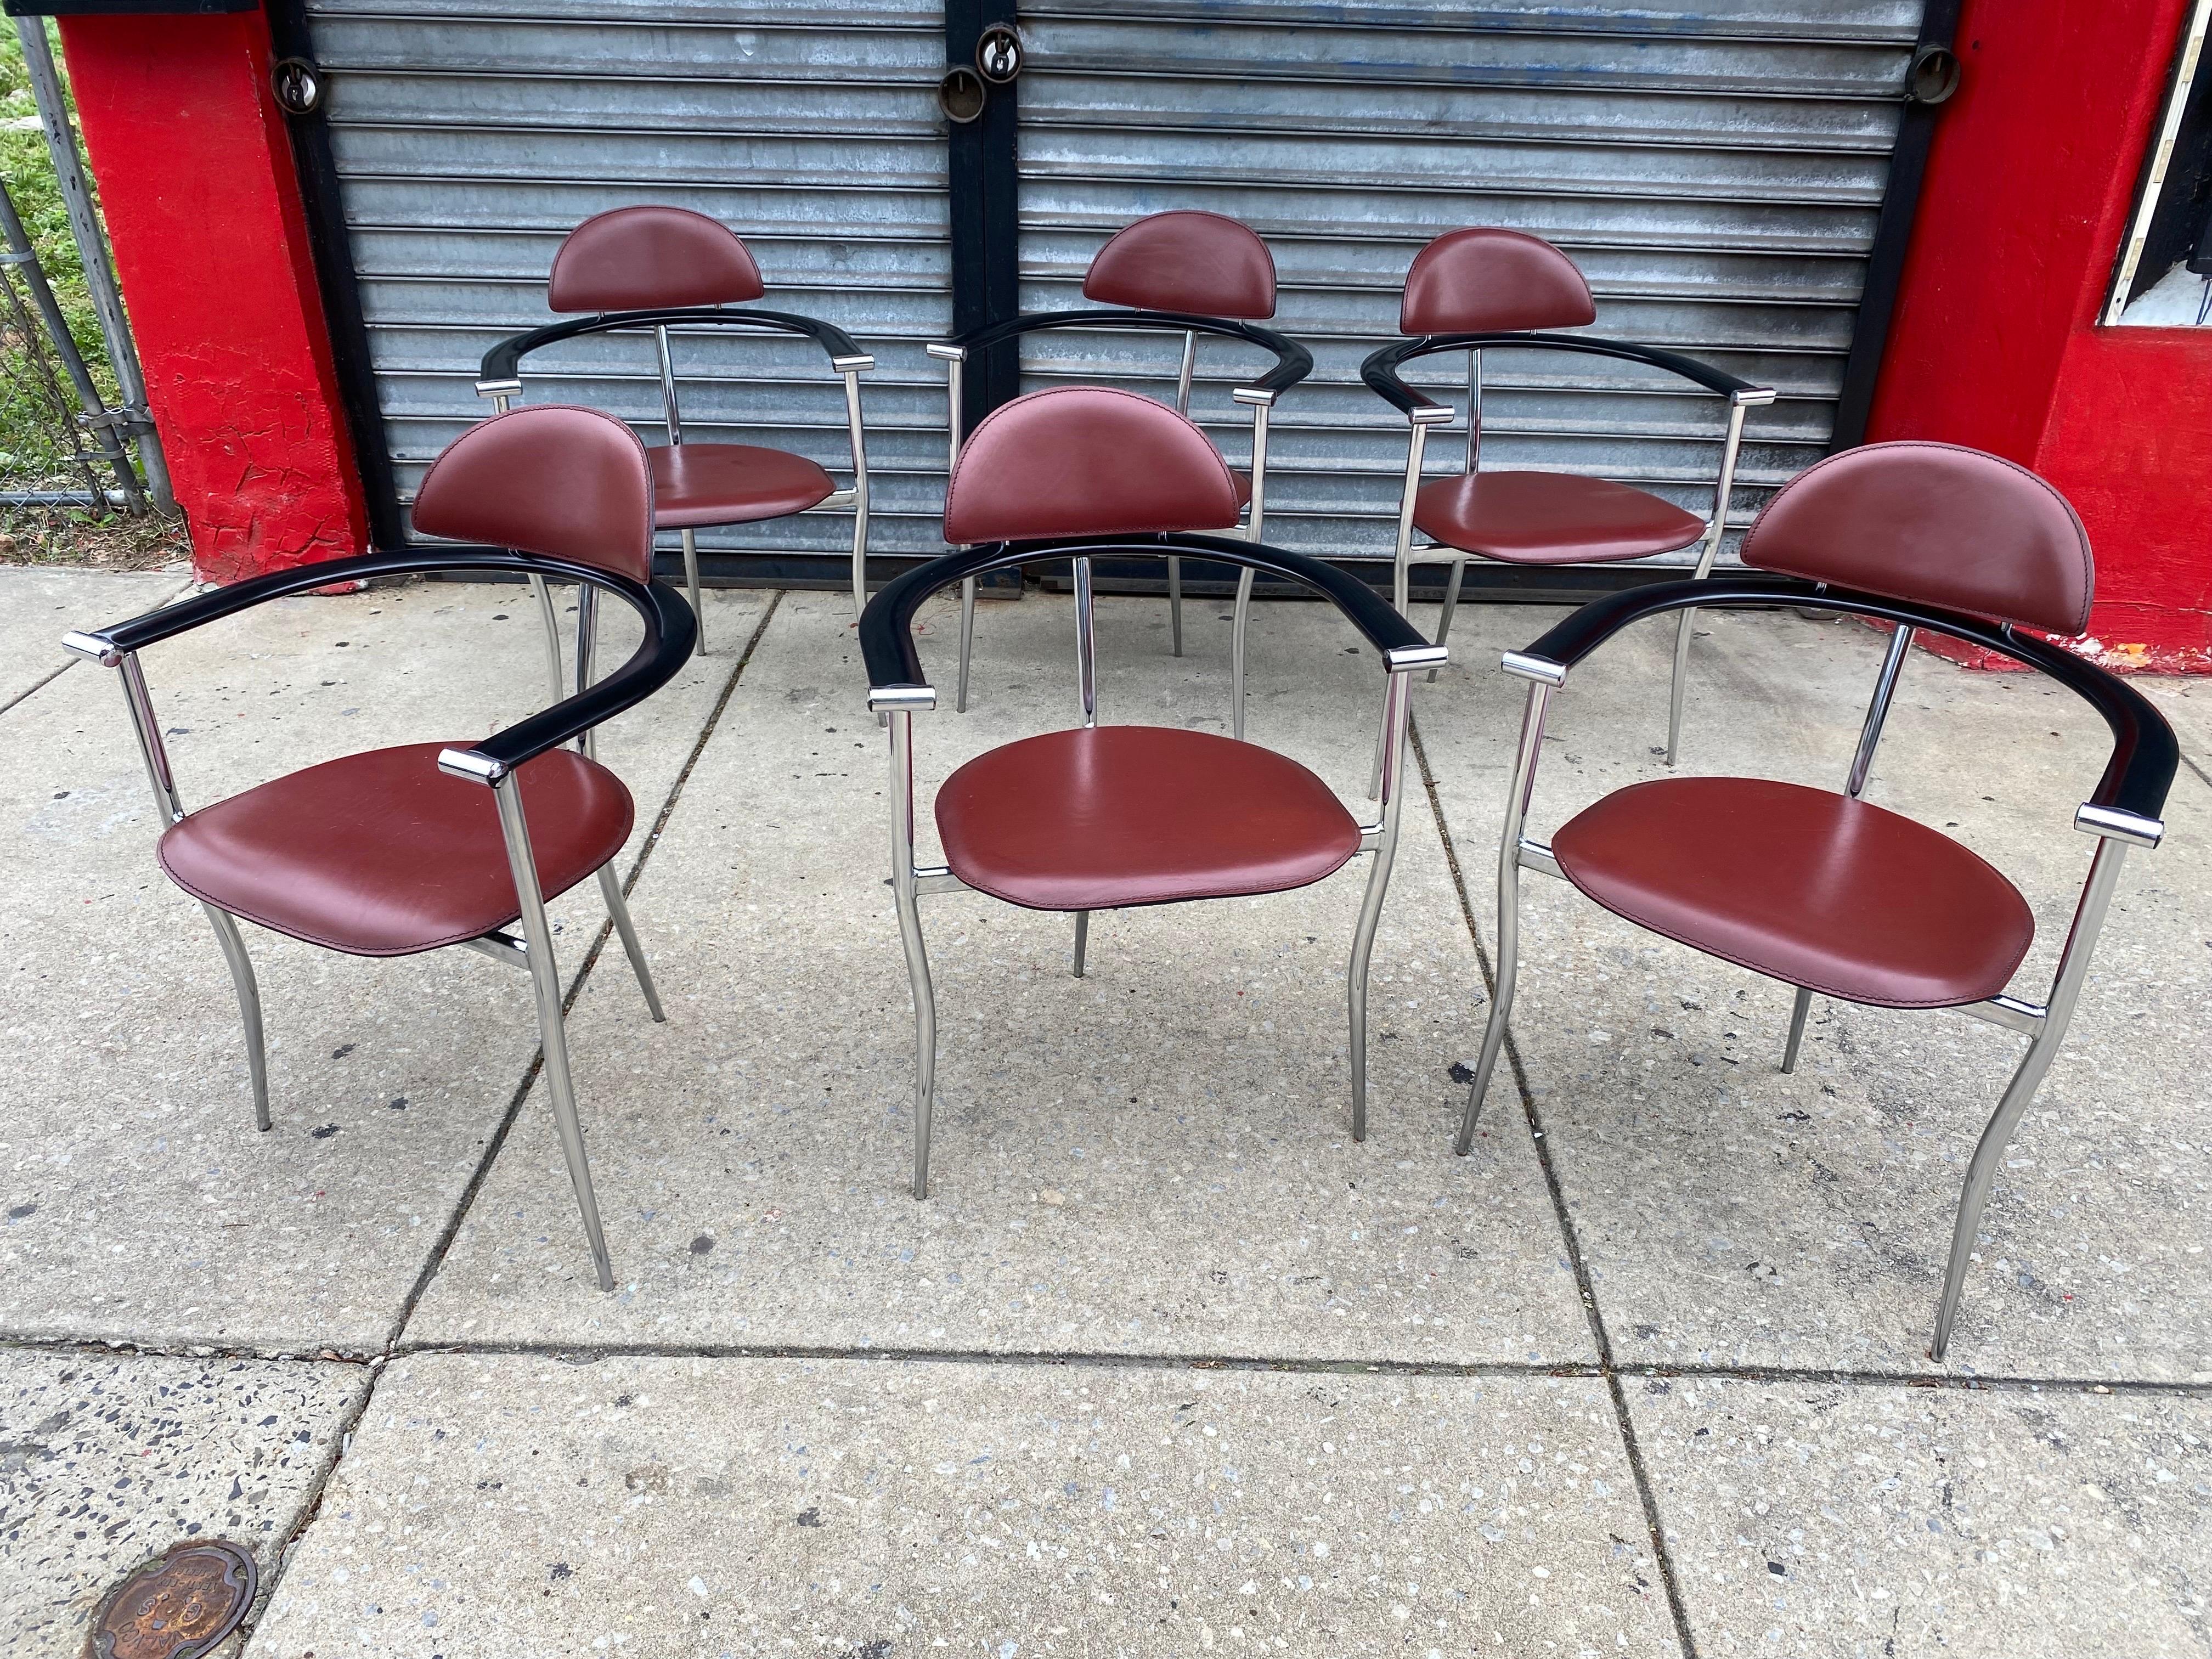 Set of 6 Arrben Stiletto Chairs. Perfect to use as Dining or around a conference Table. Very nice Original Condition. Great unique Design! Arms are 26